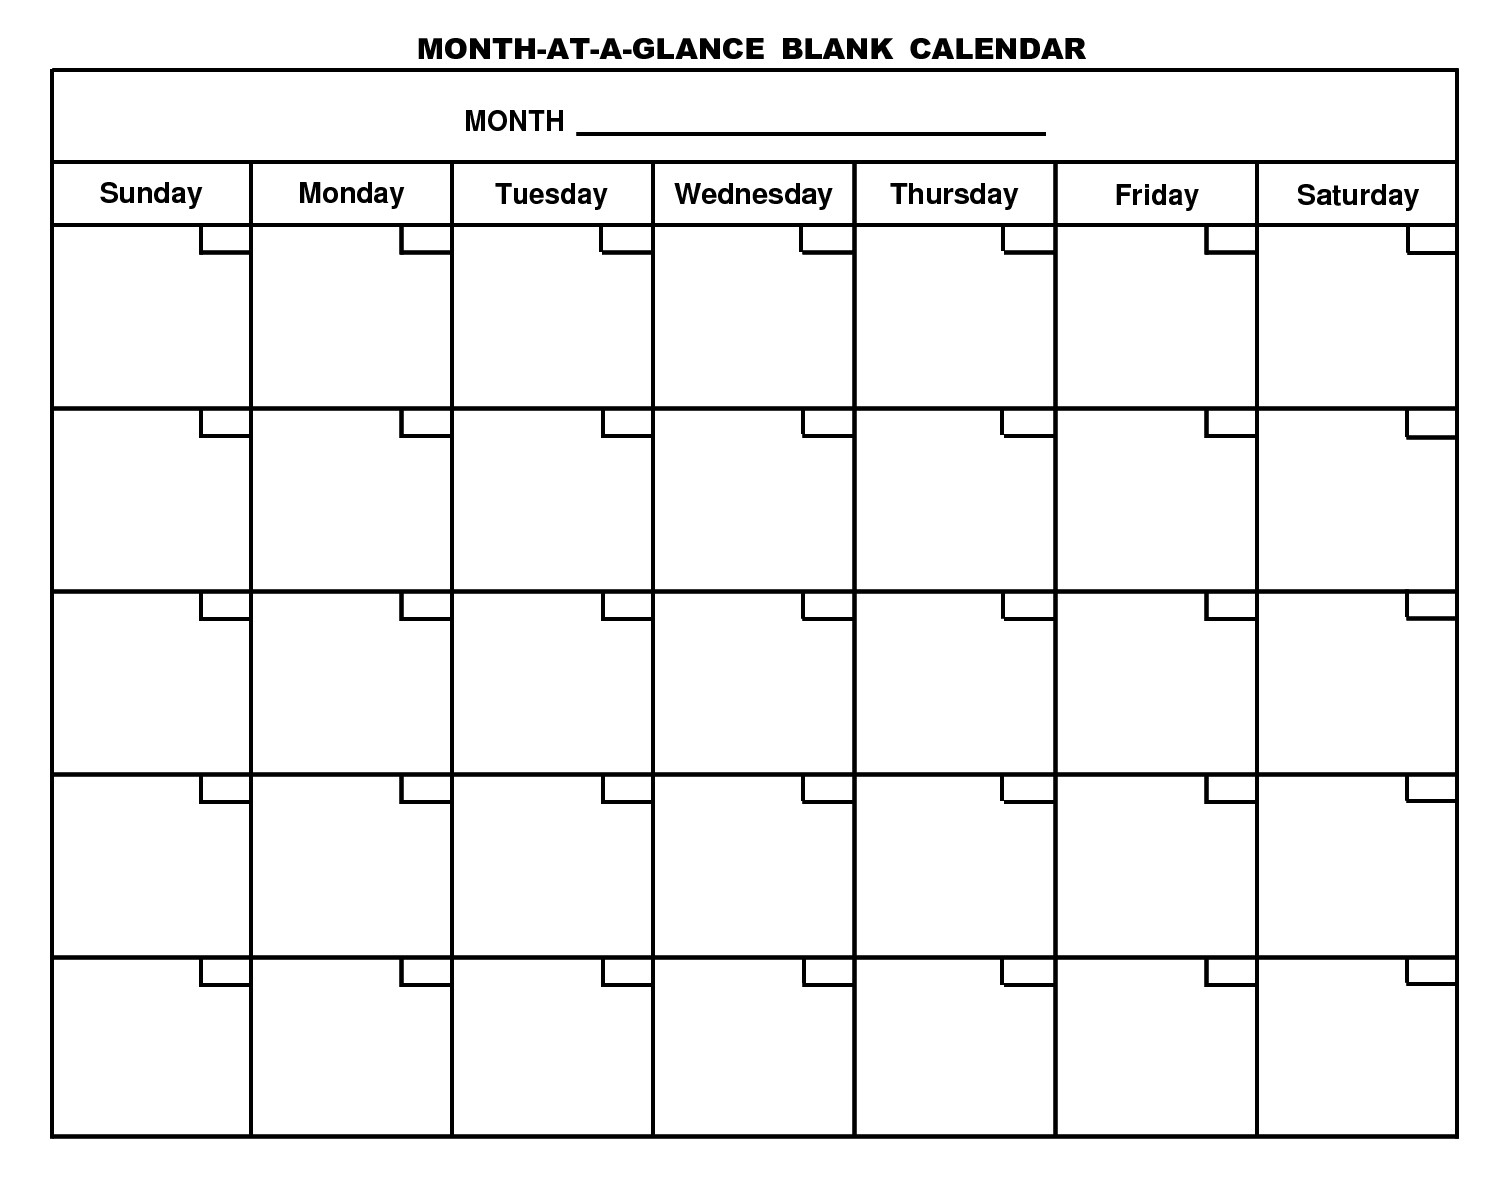 Free Printable Monthly Calendars At A Glance | Monthly